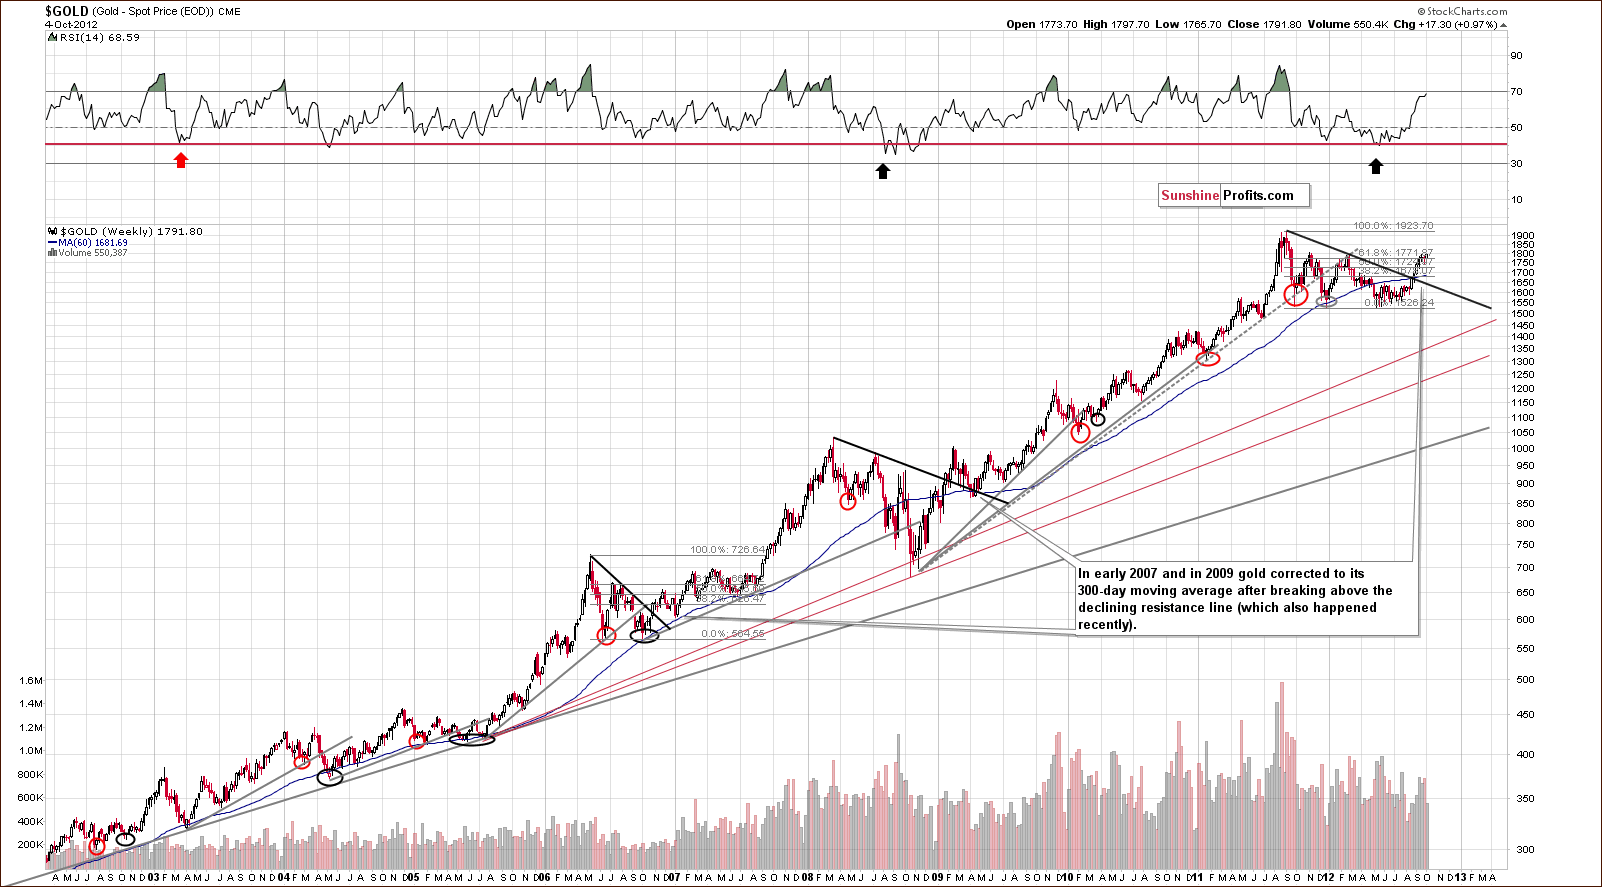 Very long-term gold price chart